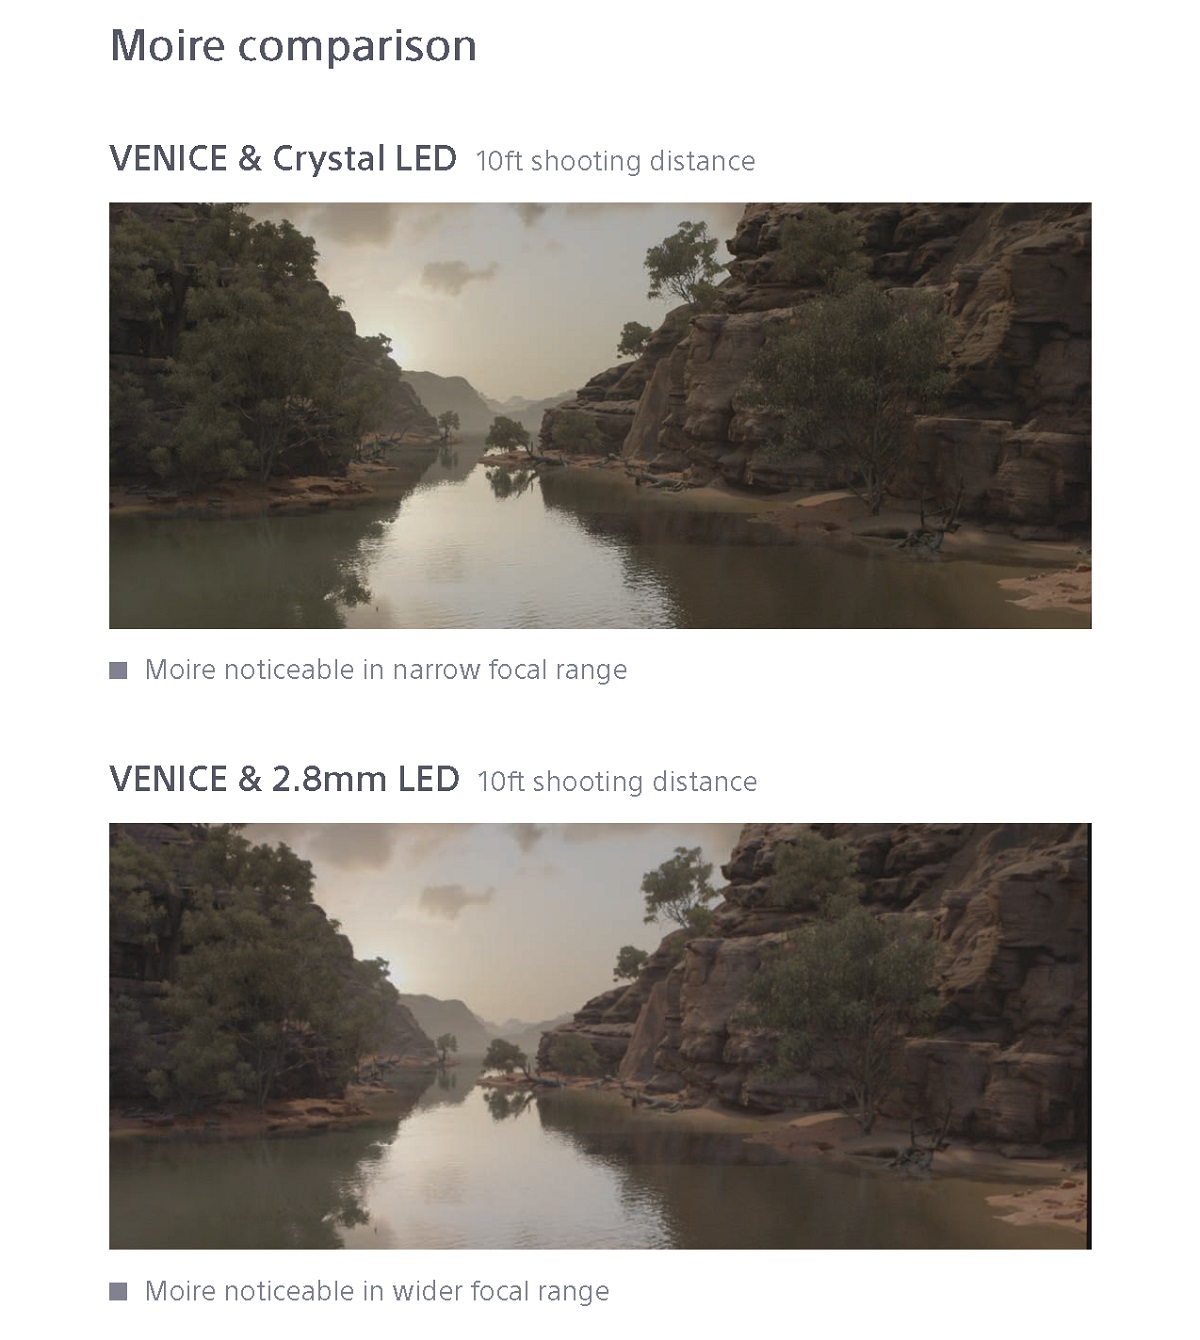 Test images shot using a Sony VENICE 6K cinema camera to observe when Moiré patterns became visible.